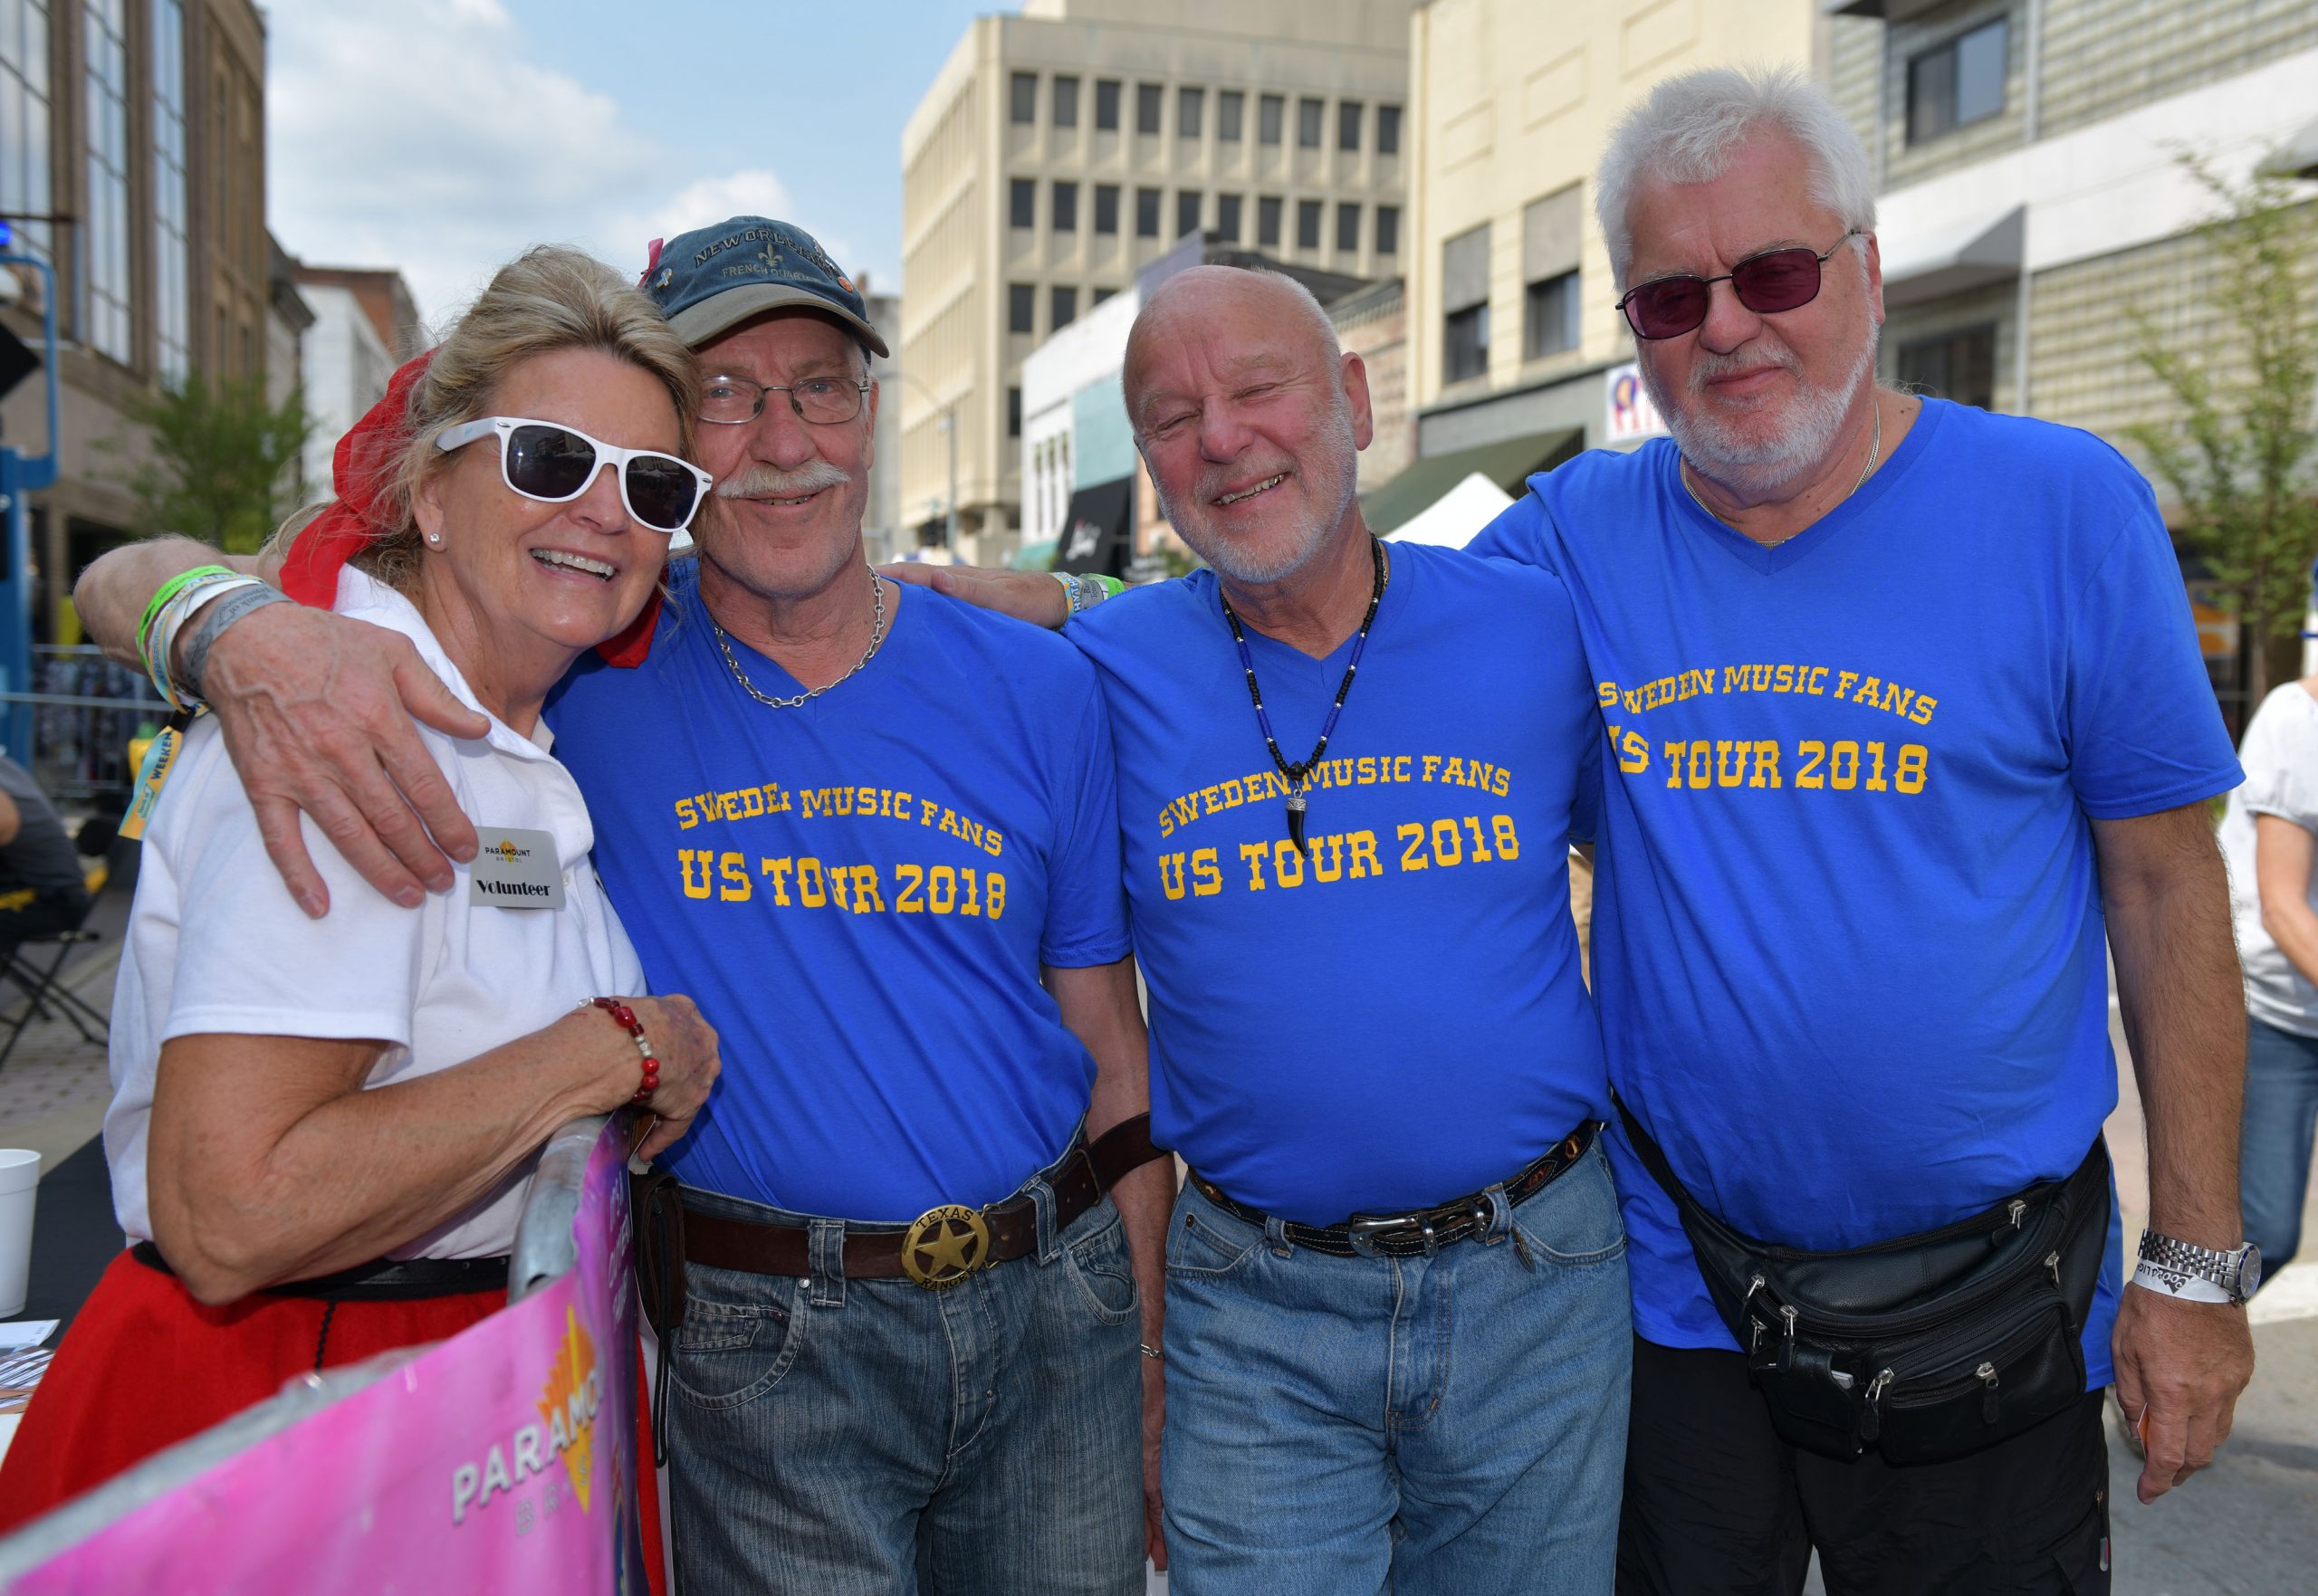 A group of three men and one woman, the men wearing matching t-shirts that read "Swedish Music Fans US Tour 2018."